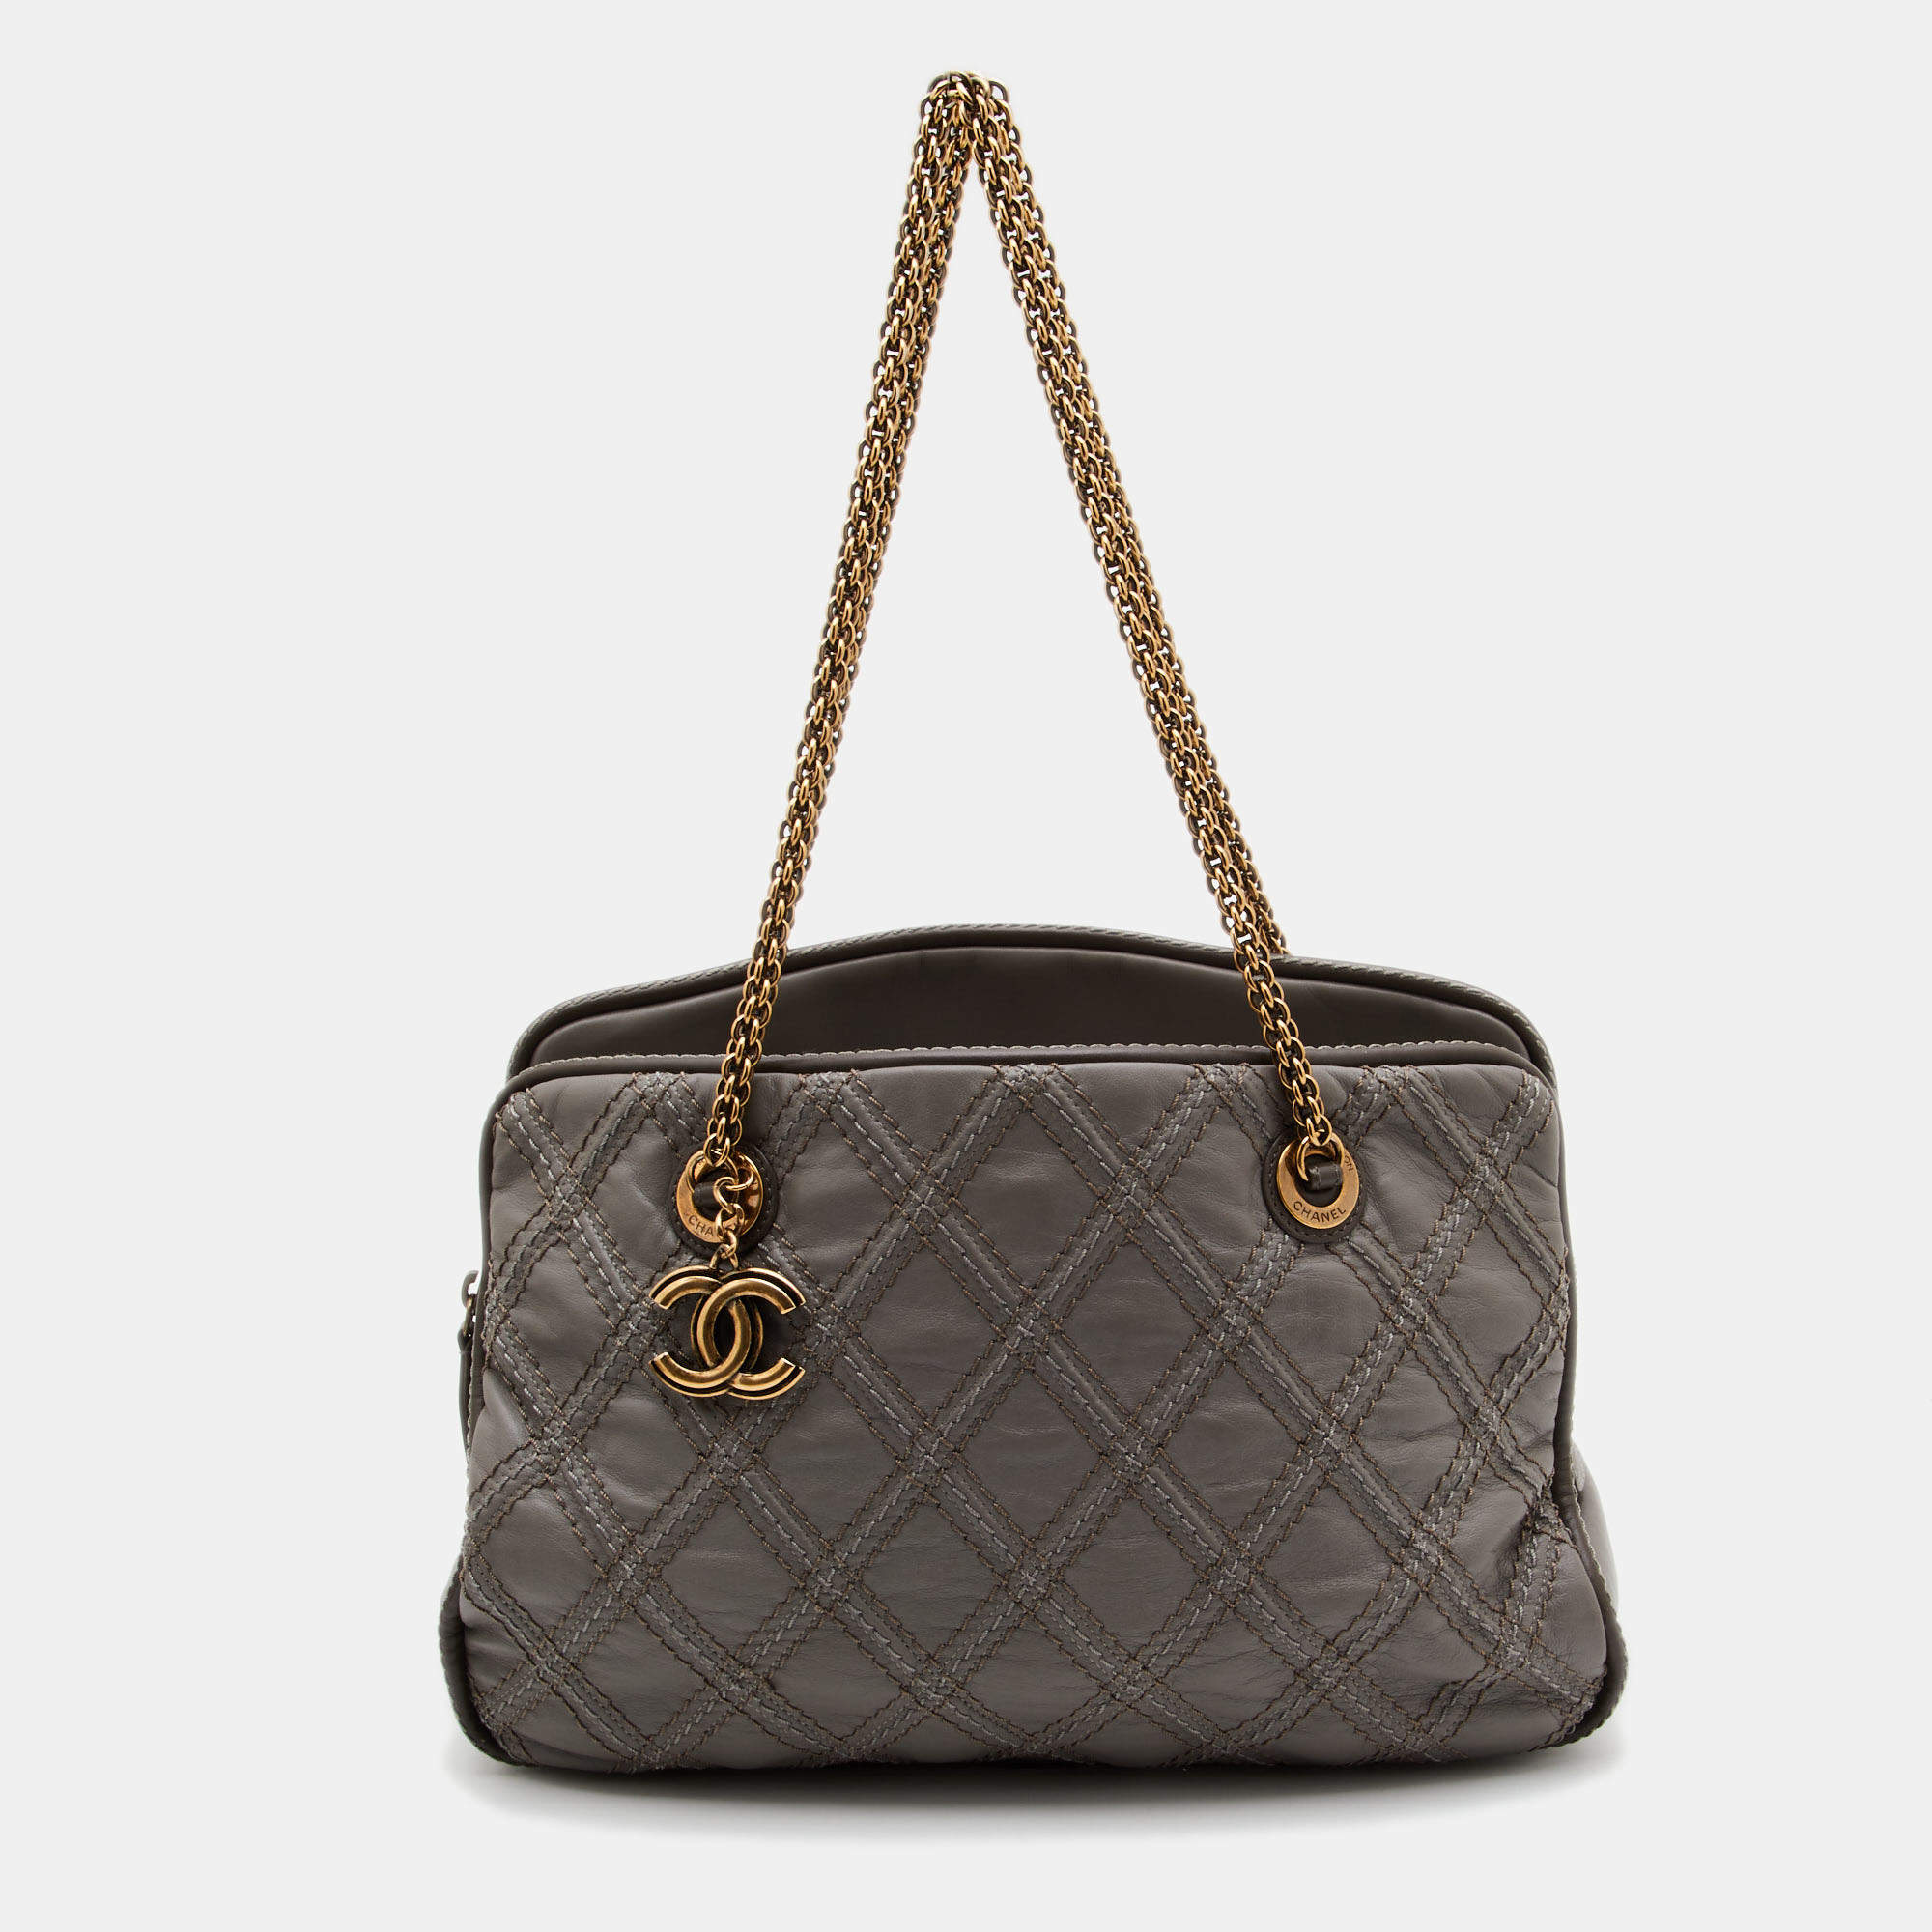 Chanel Grey Quilted Stitch Leather Triptych Tote